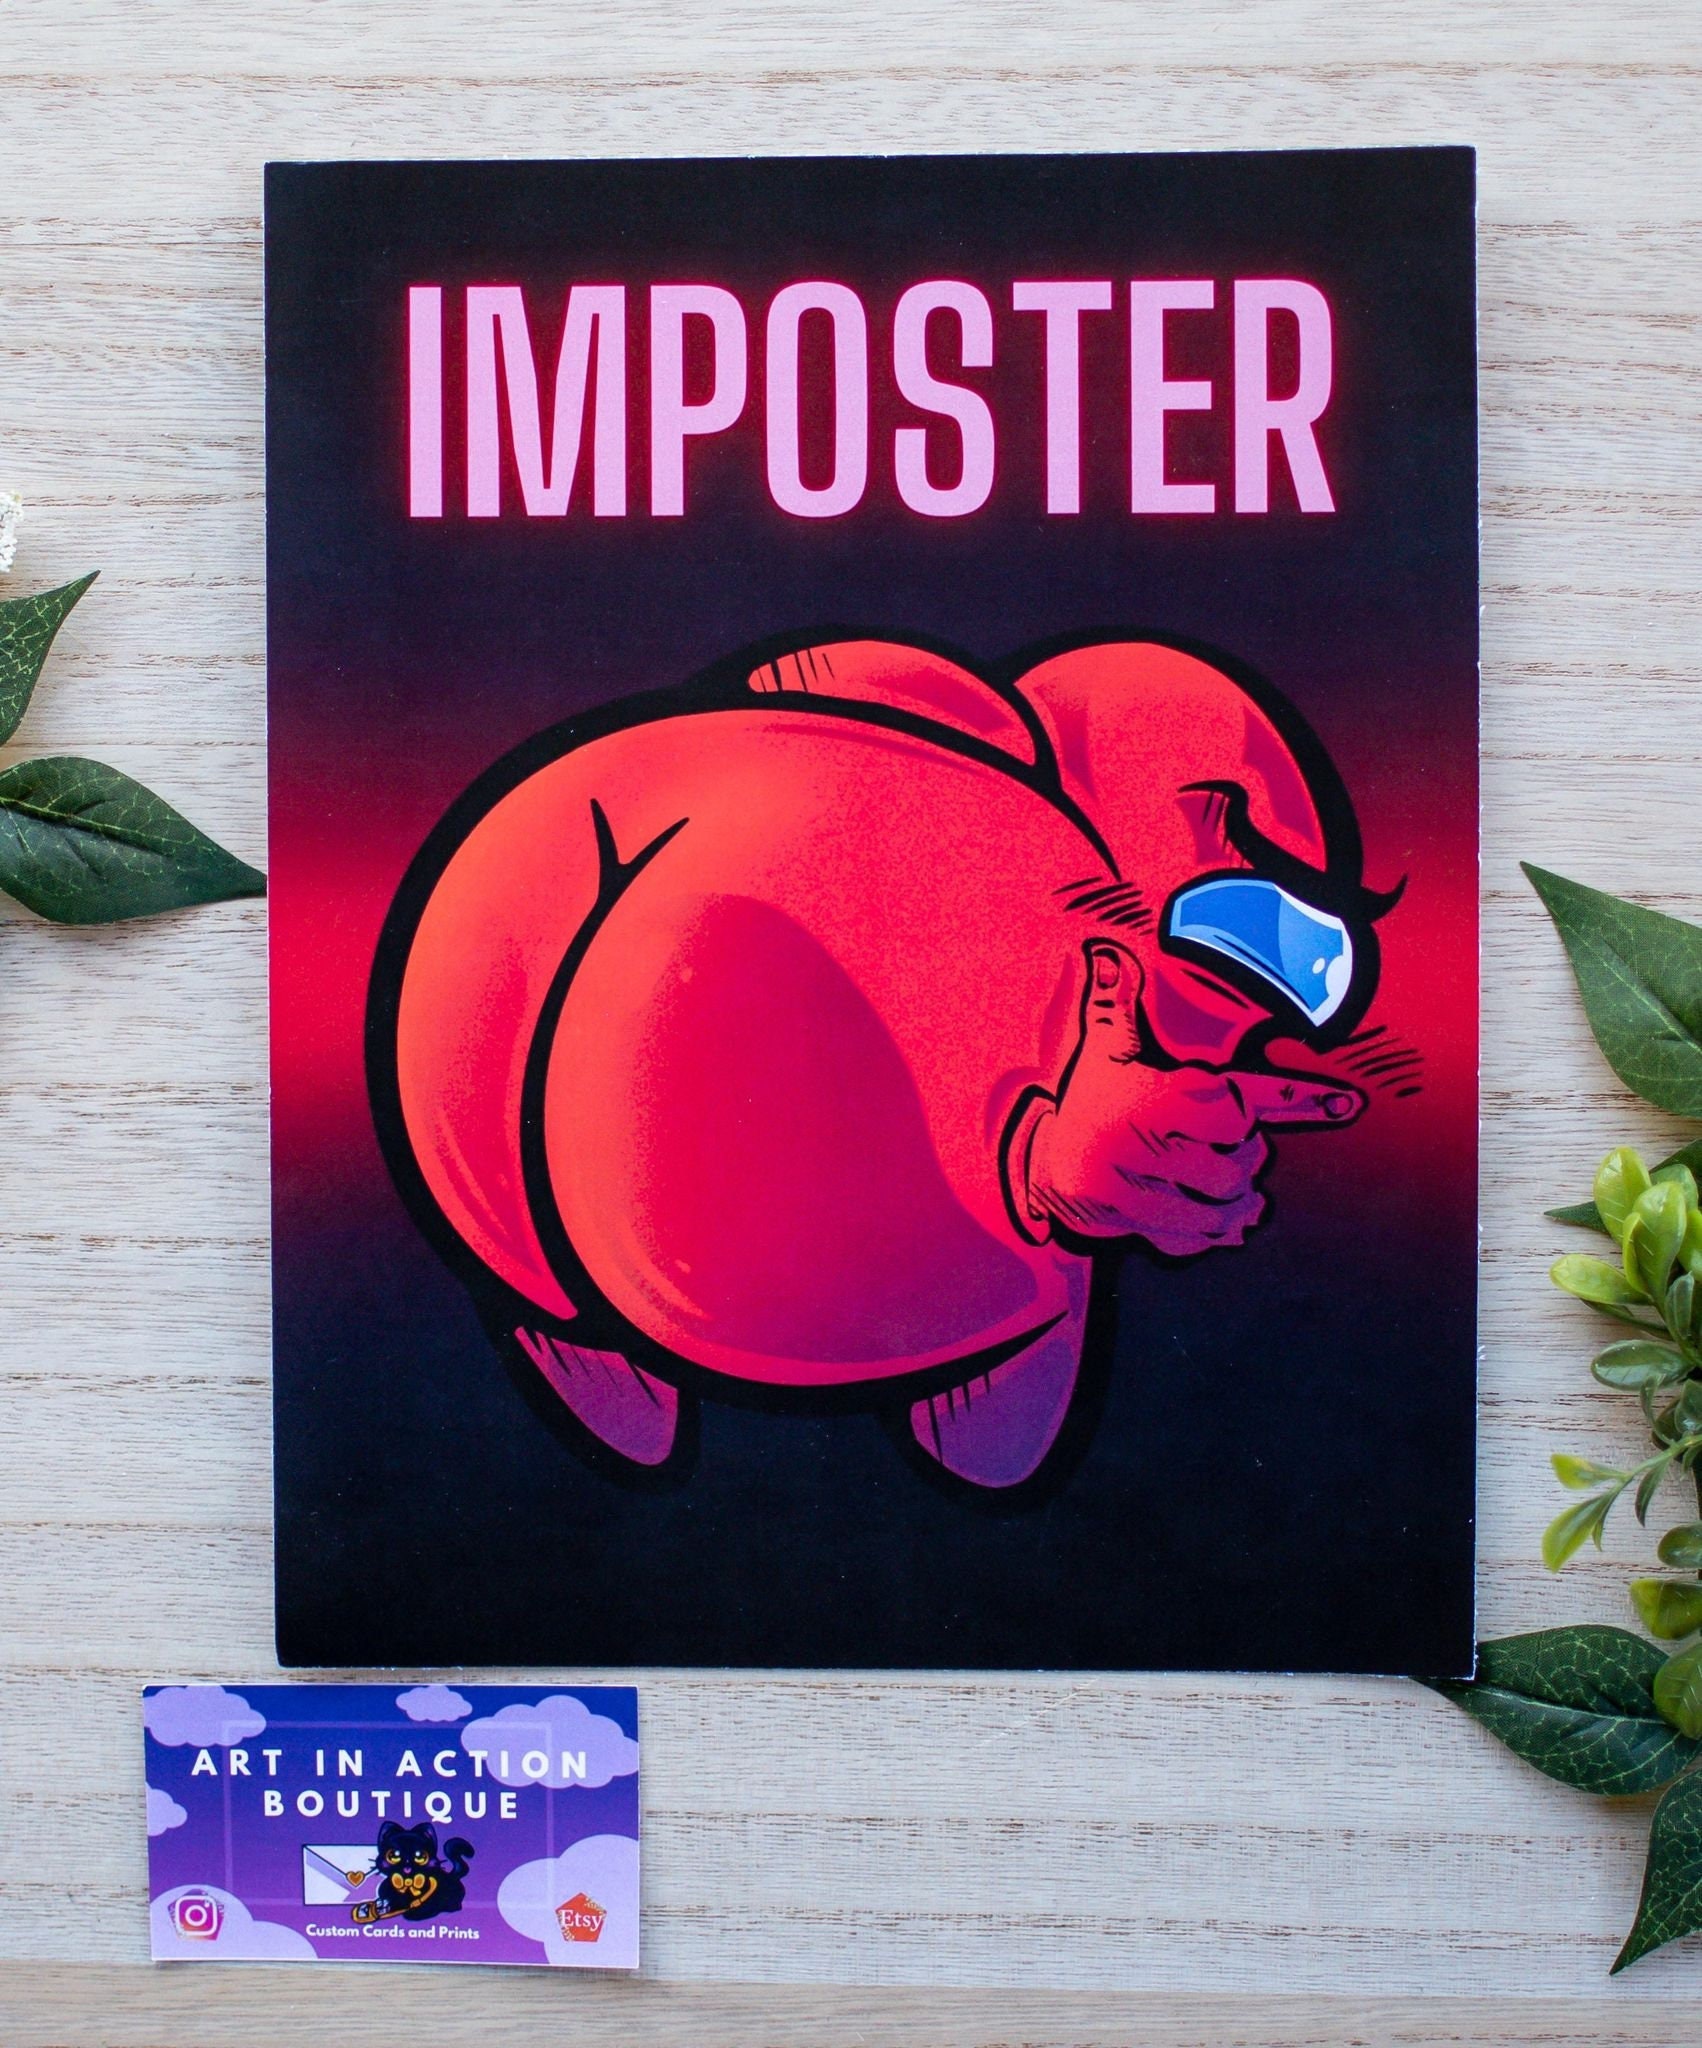 Among Us: Thicc Sus - Meme - Posters and Art Prints